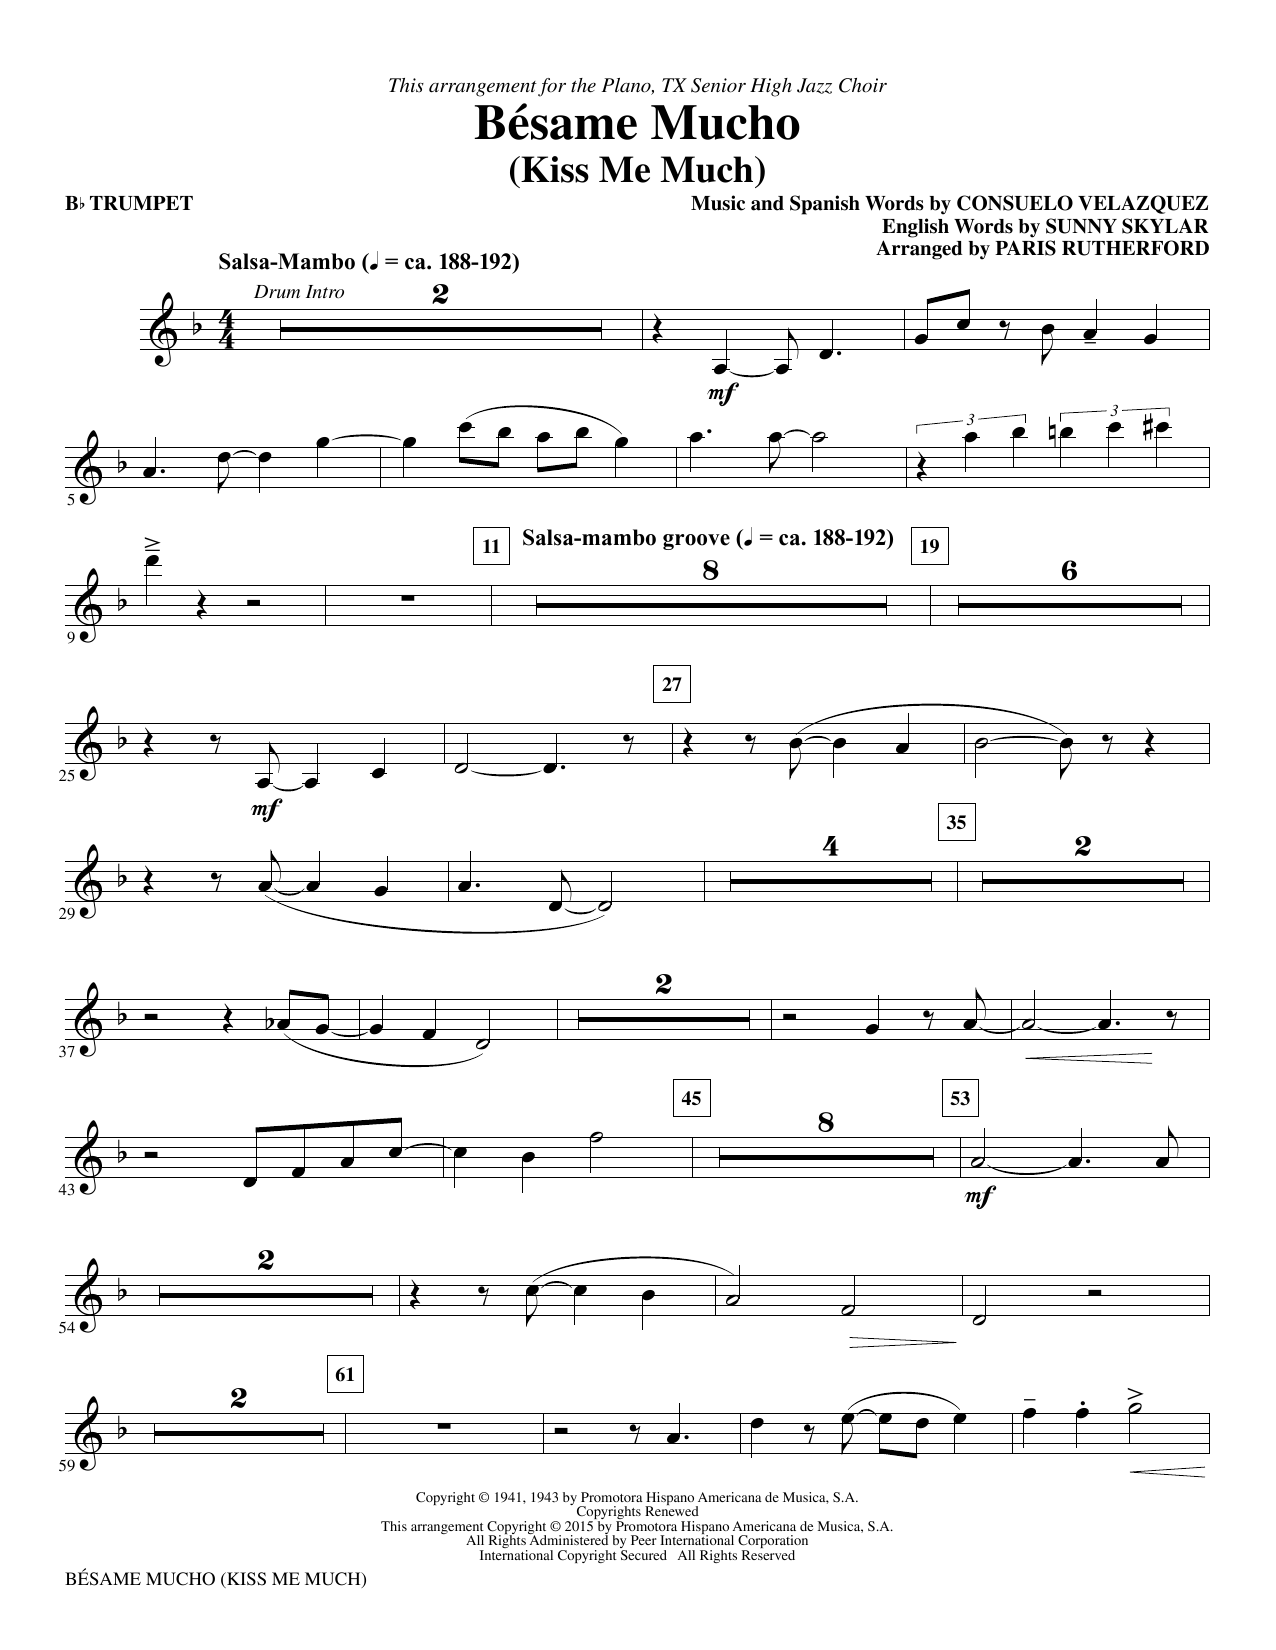 Paris Rutherford Besame Mucho (Kiss Me Much) - Bb Trumpet sheet music notes and chords. Download Printable PDF.